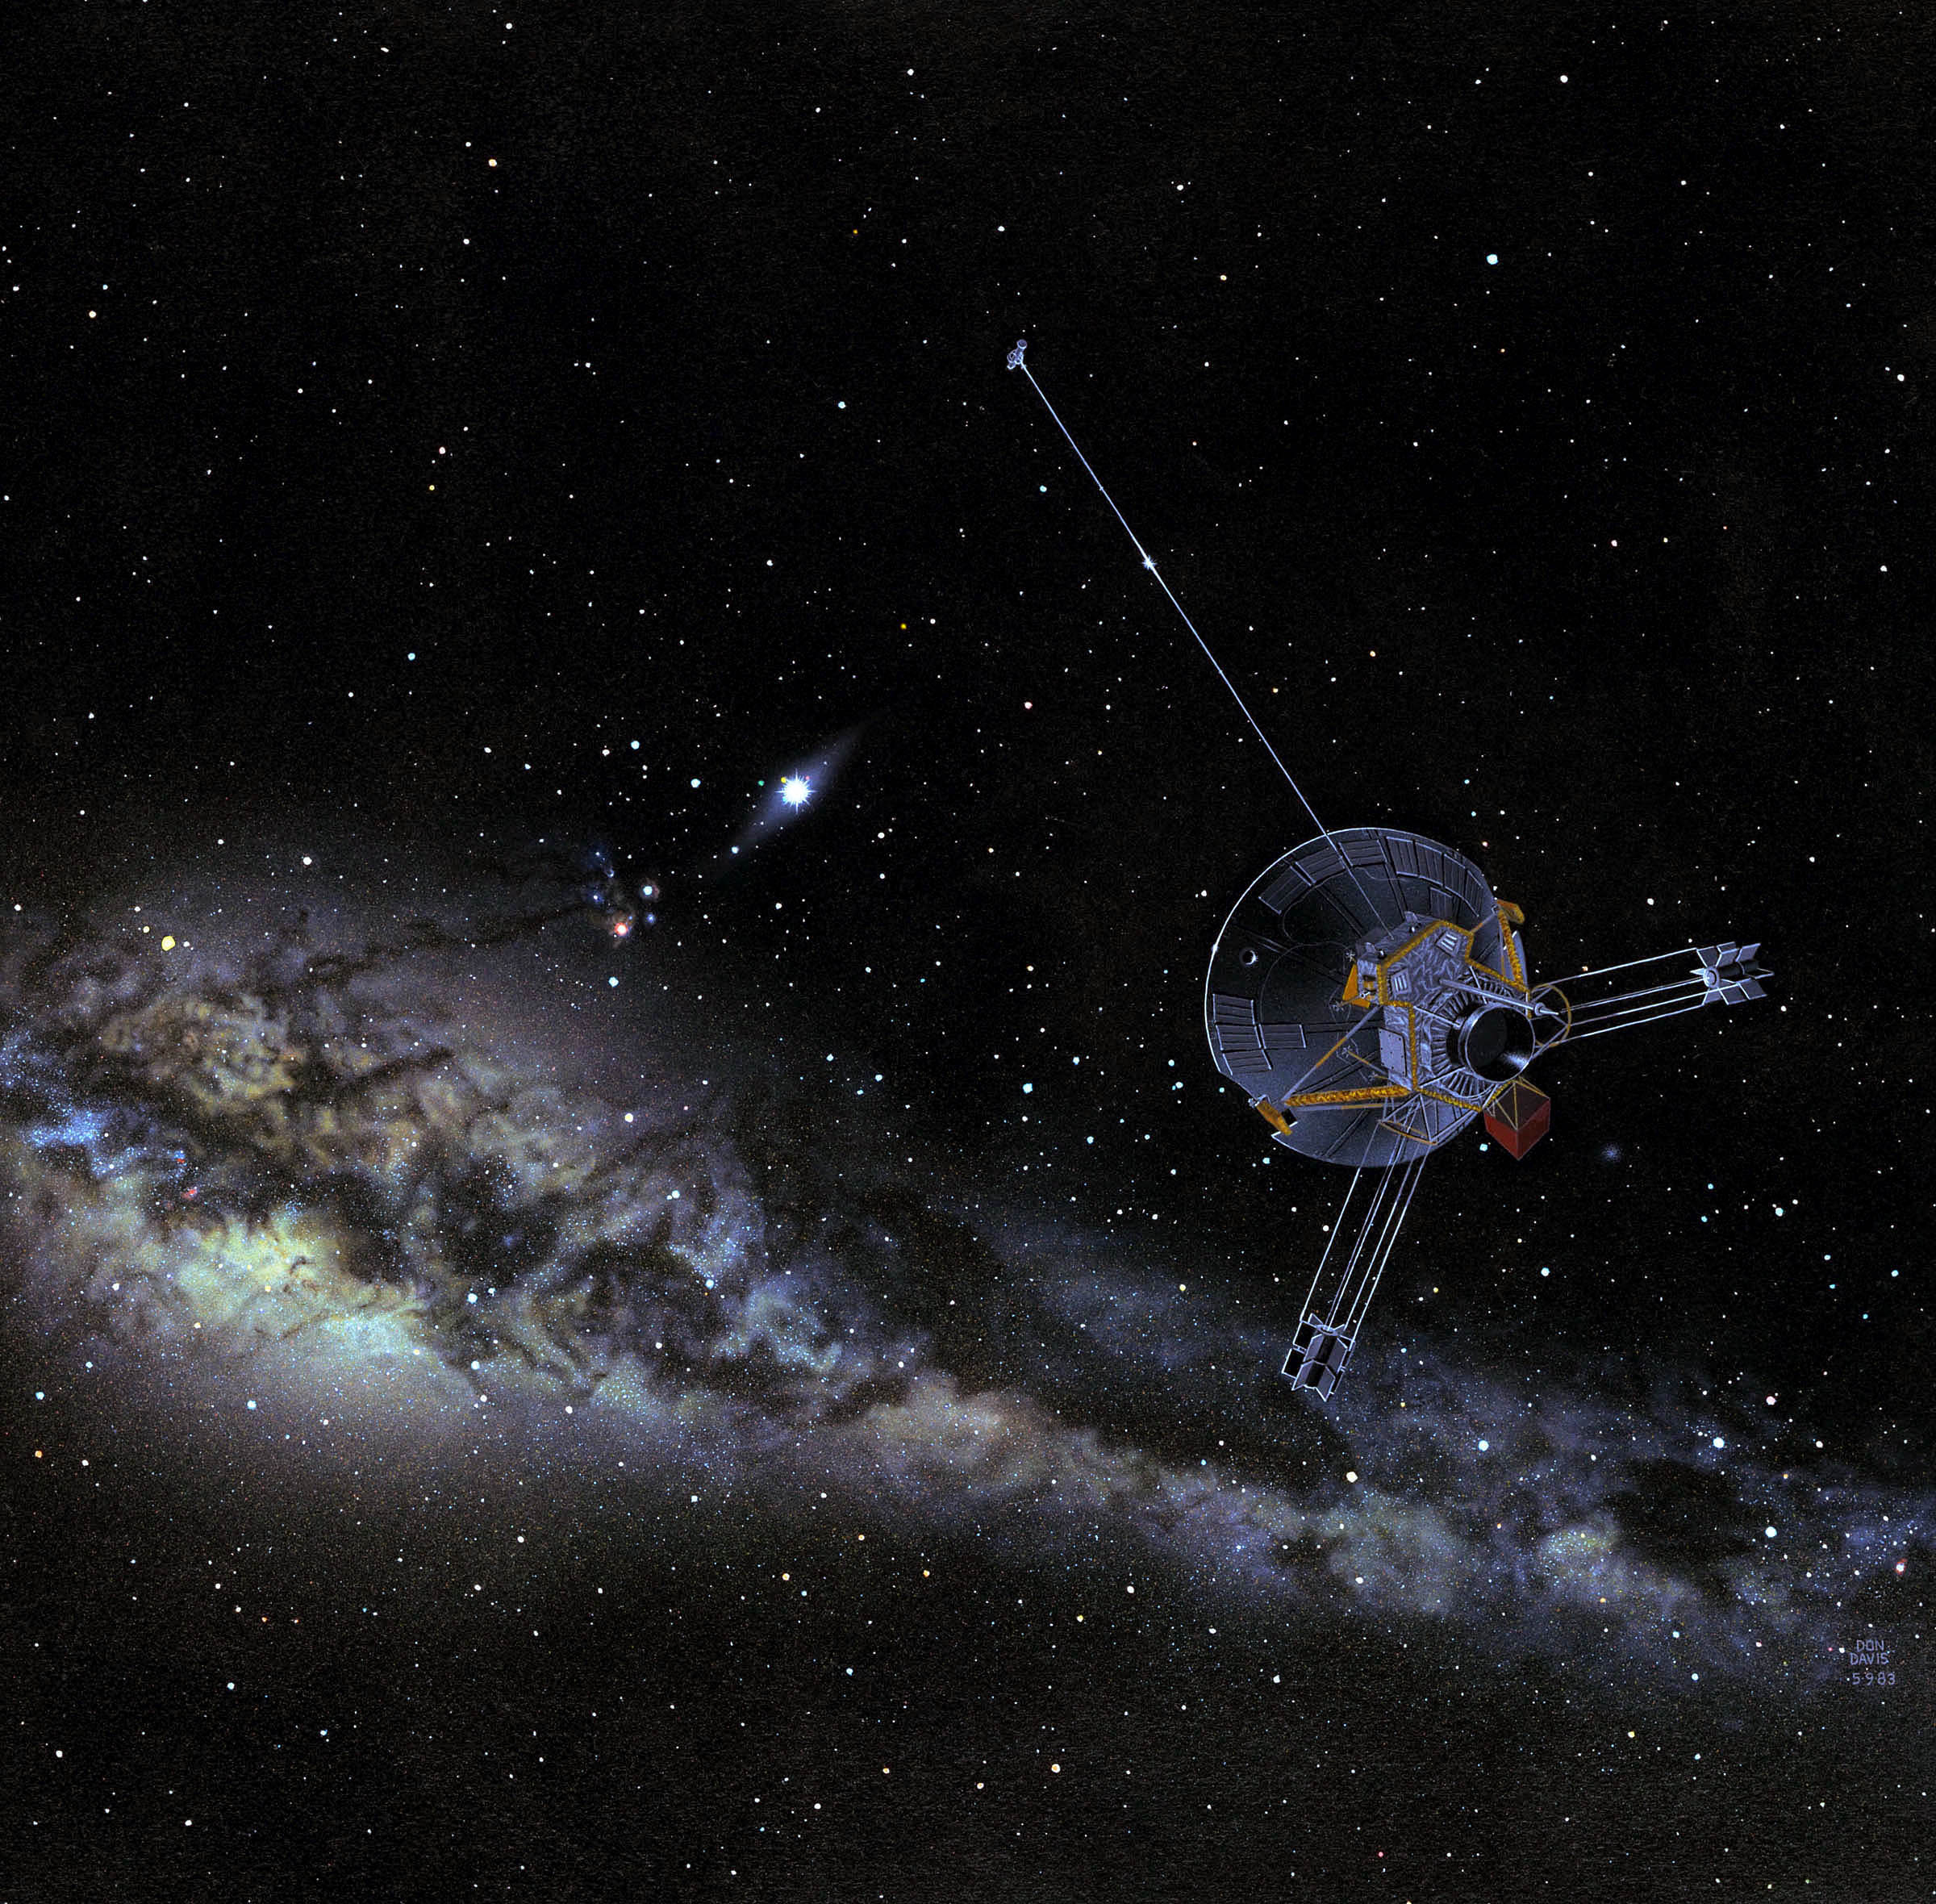 Pioneer 10 or 11 in outer solar system